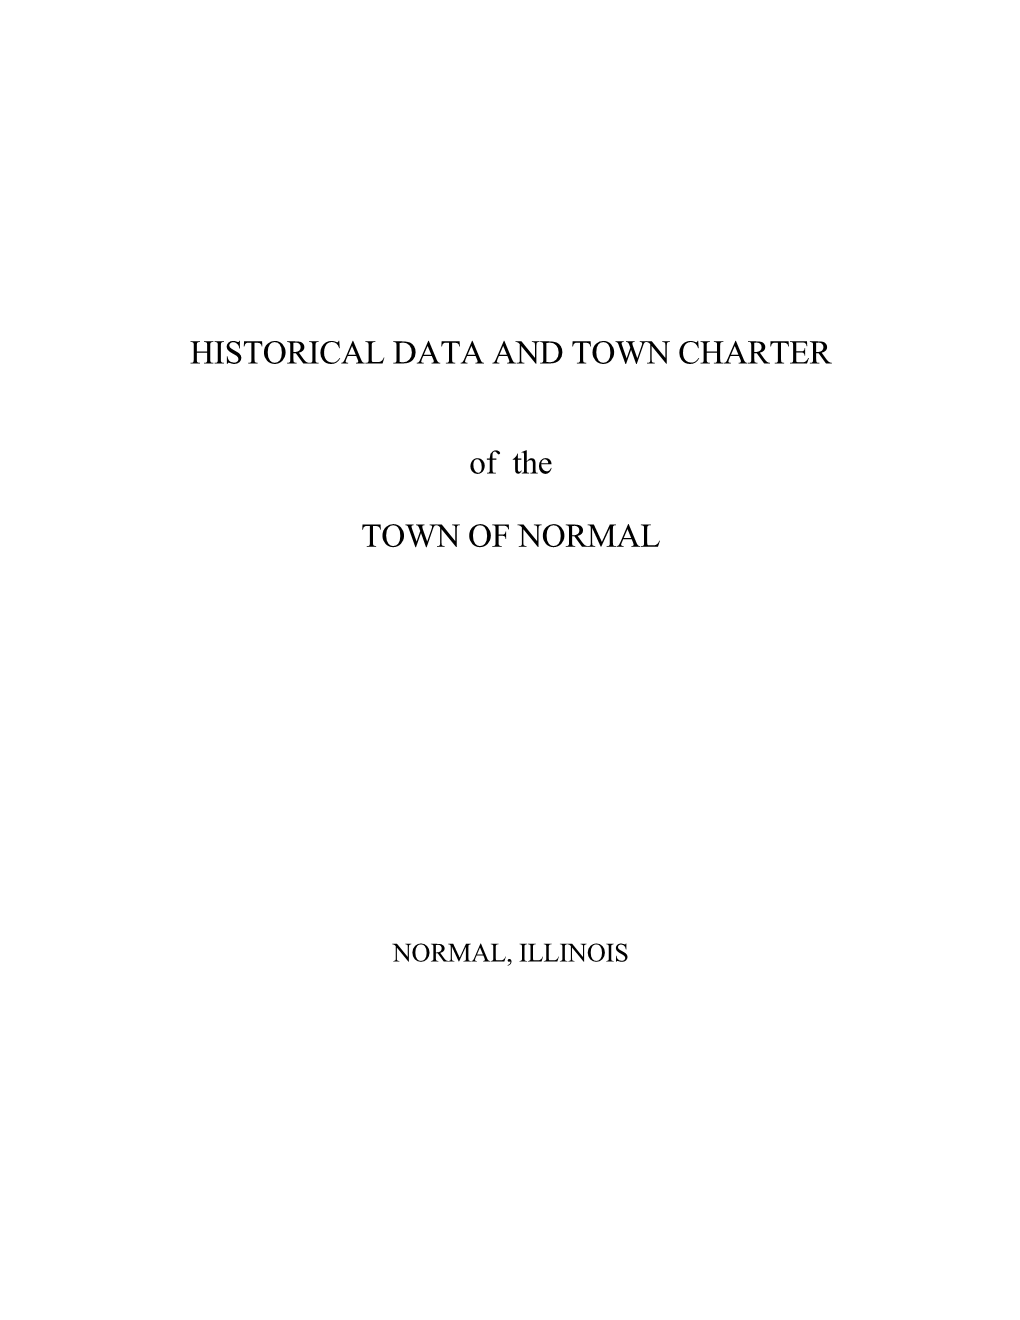 HISTORICAL DATA and TOWN CHARTER of the TOWN of NORMAL